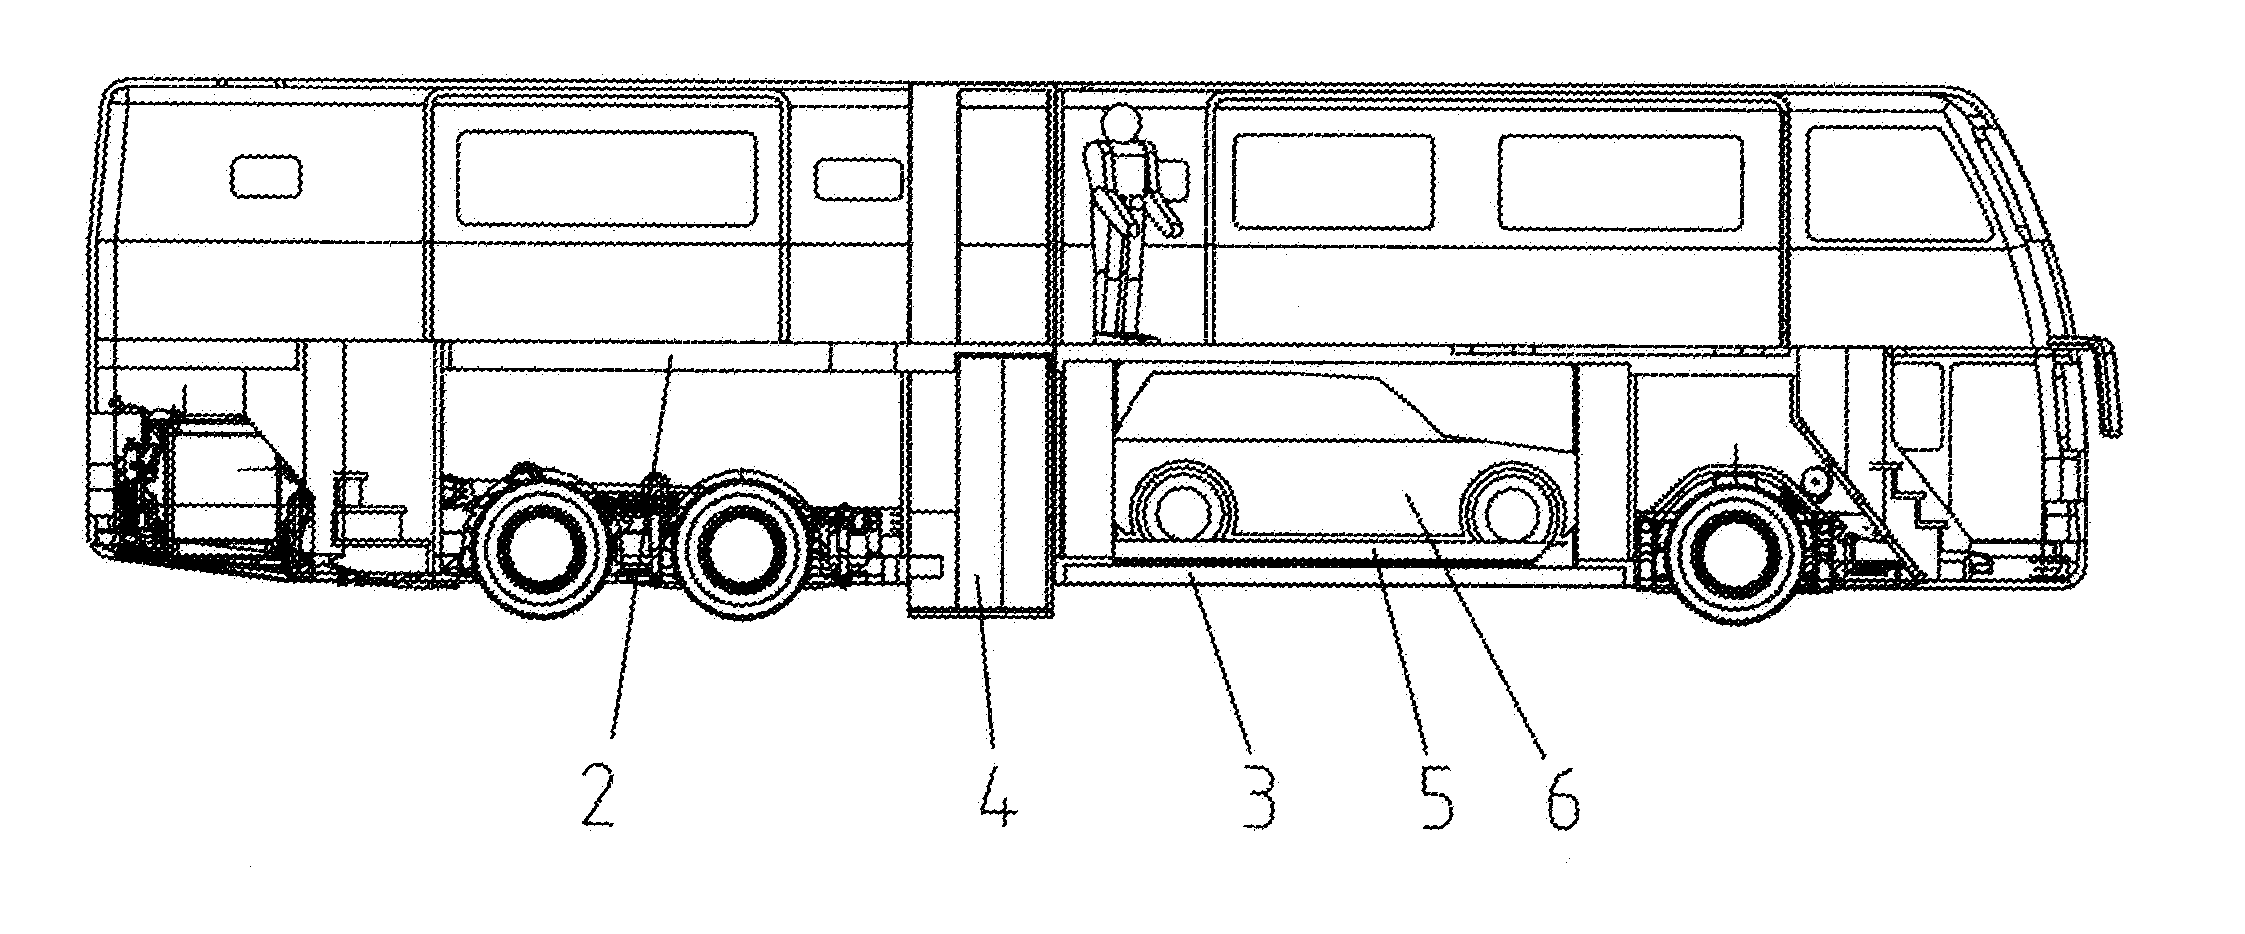 Motorhome with onboard touring car, elevator, and crew cabin